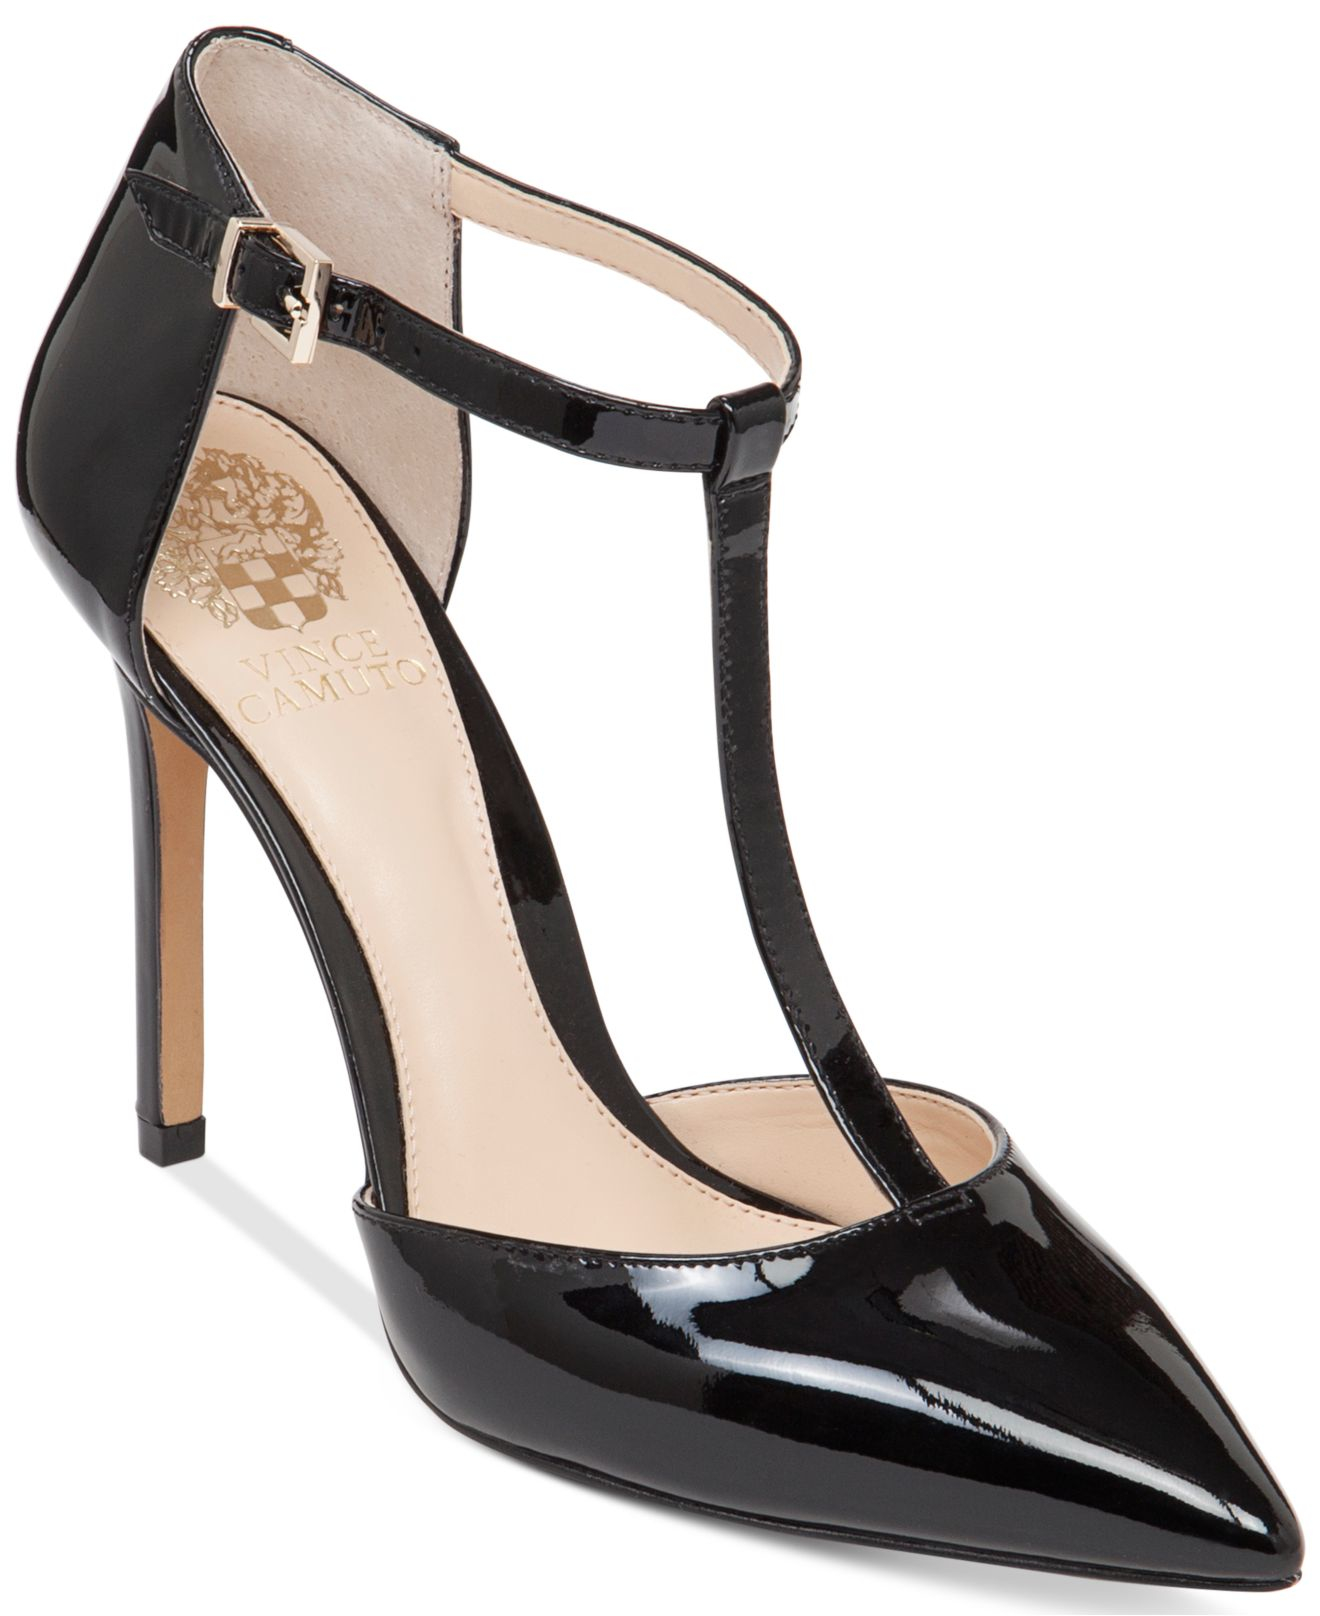 Vince camuto Nihal T-strap Sandals in Black | Lyst